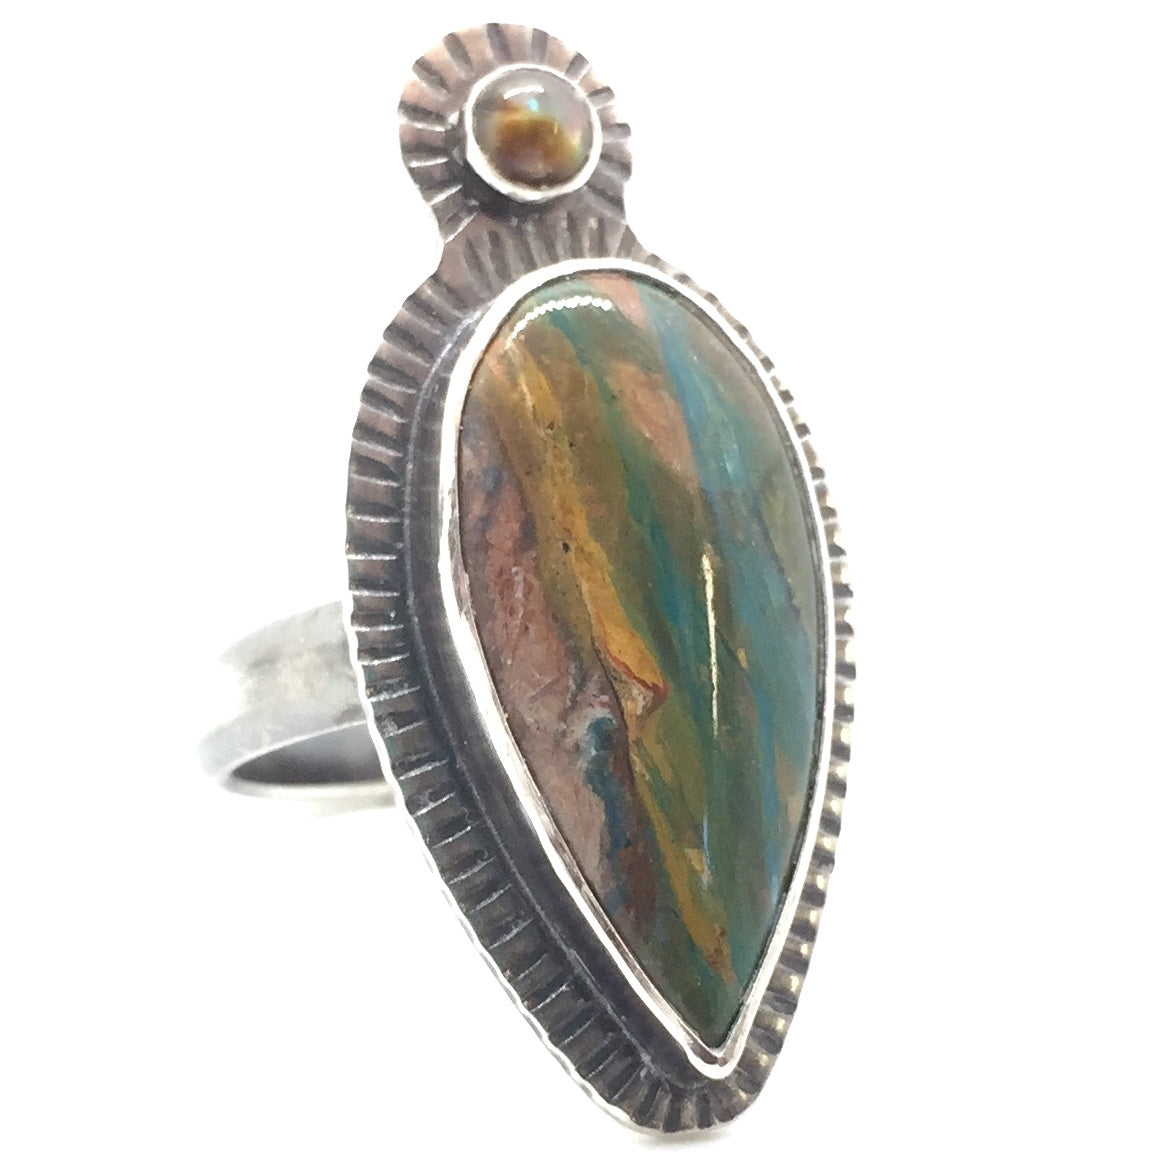 Peruvian Opal and Abalone Ring in Sterling Silver, Size 9